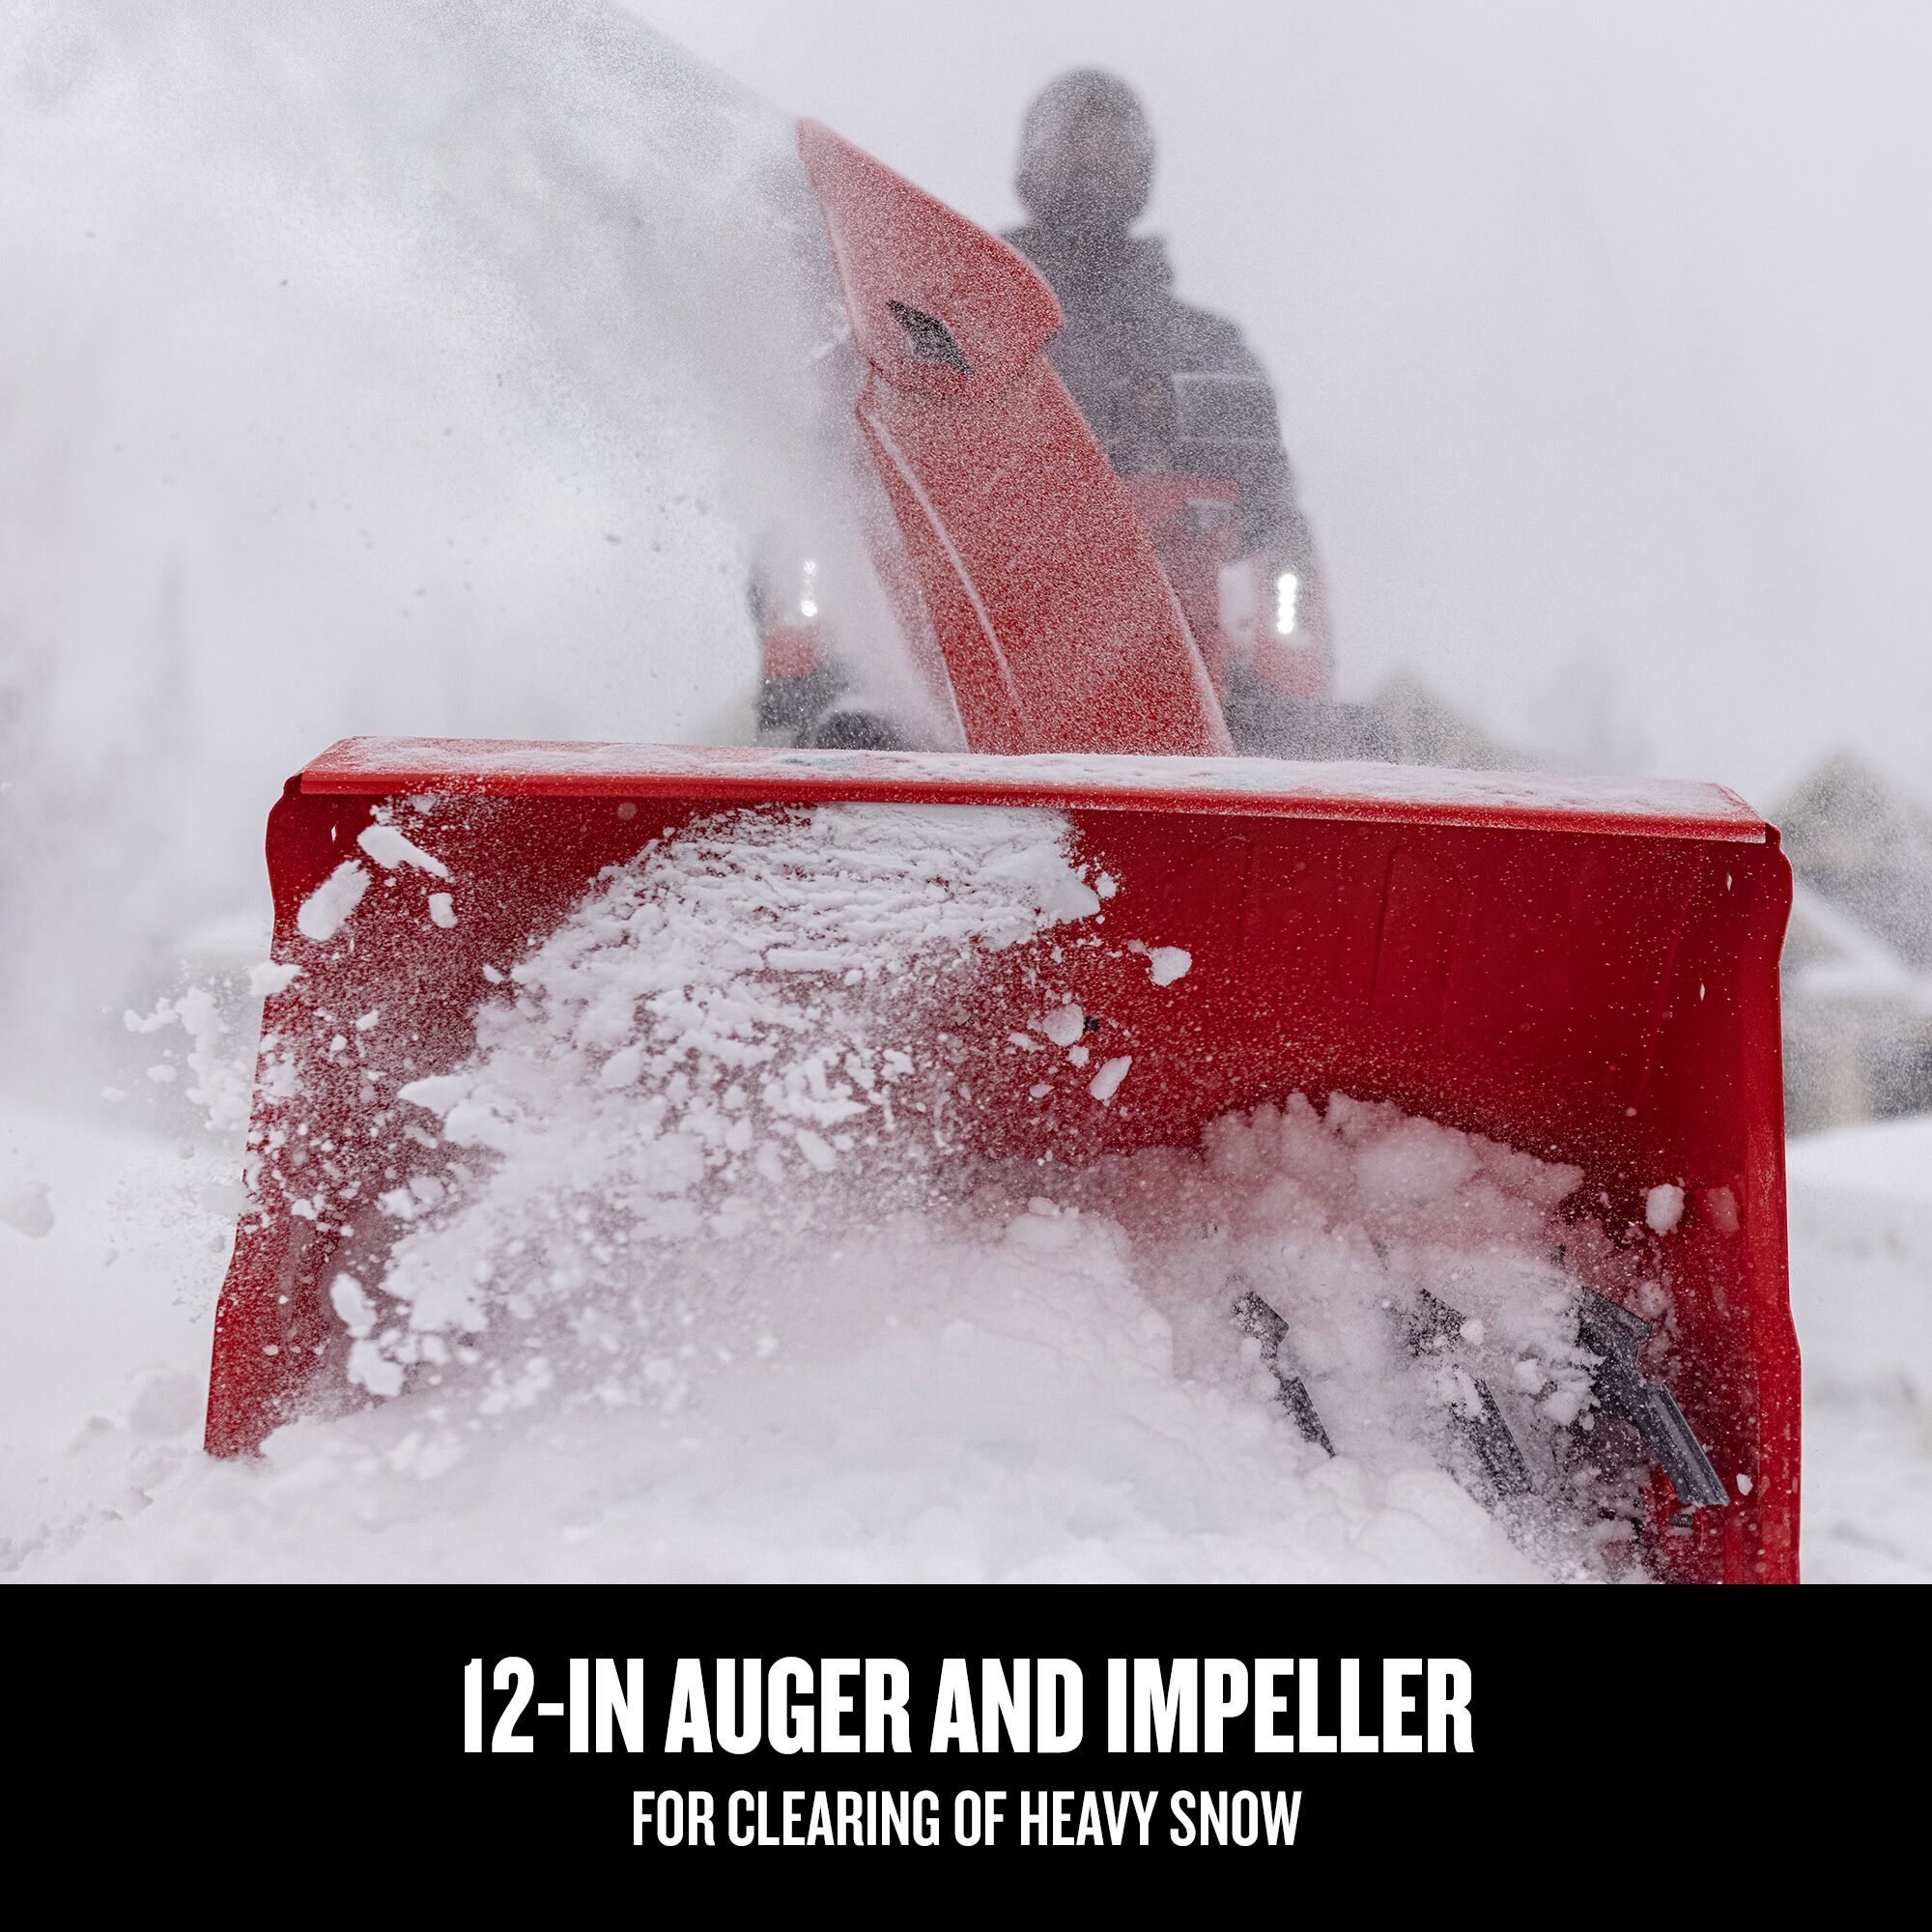 CRAFTSMAN 30-in. 357-cc Two-Stage Gas Snow Blower focused in on auger and impeller